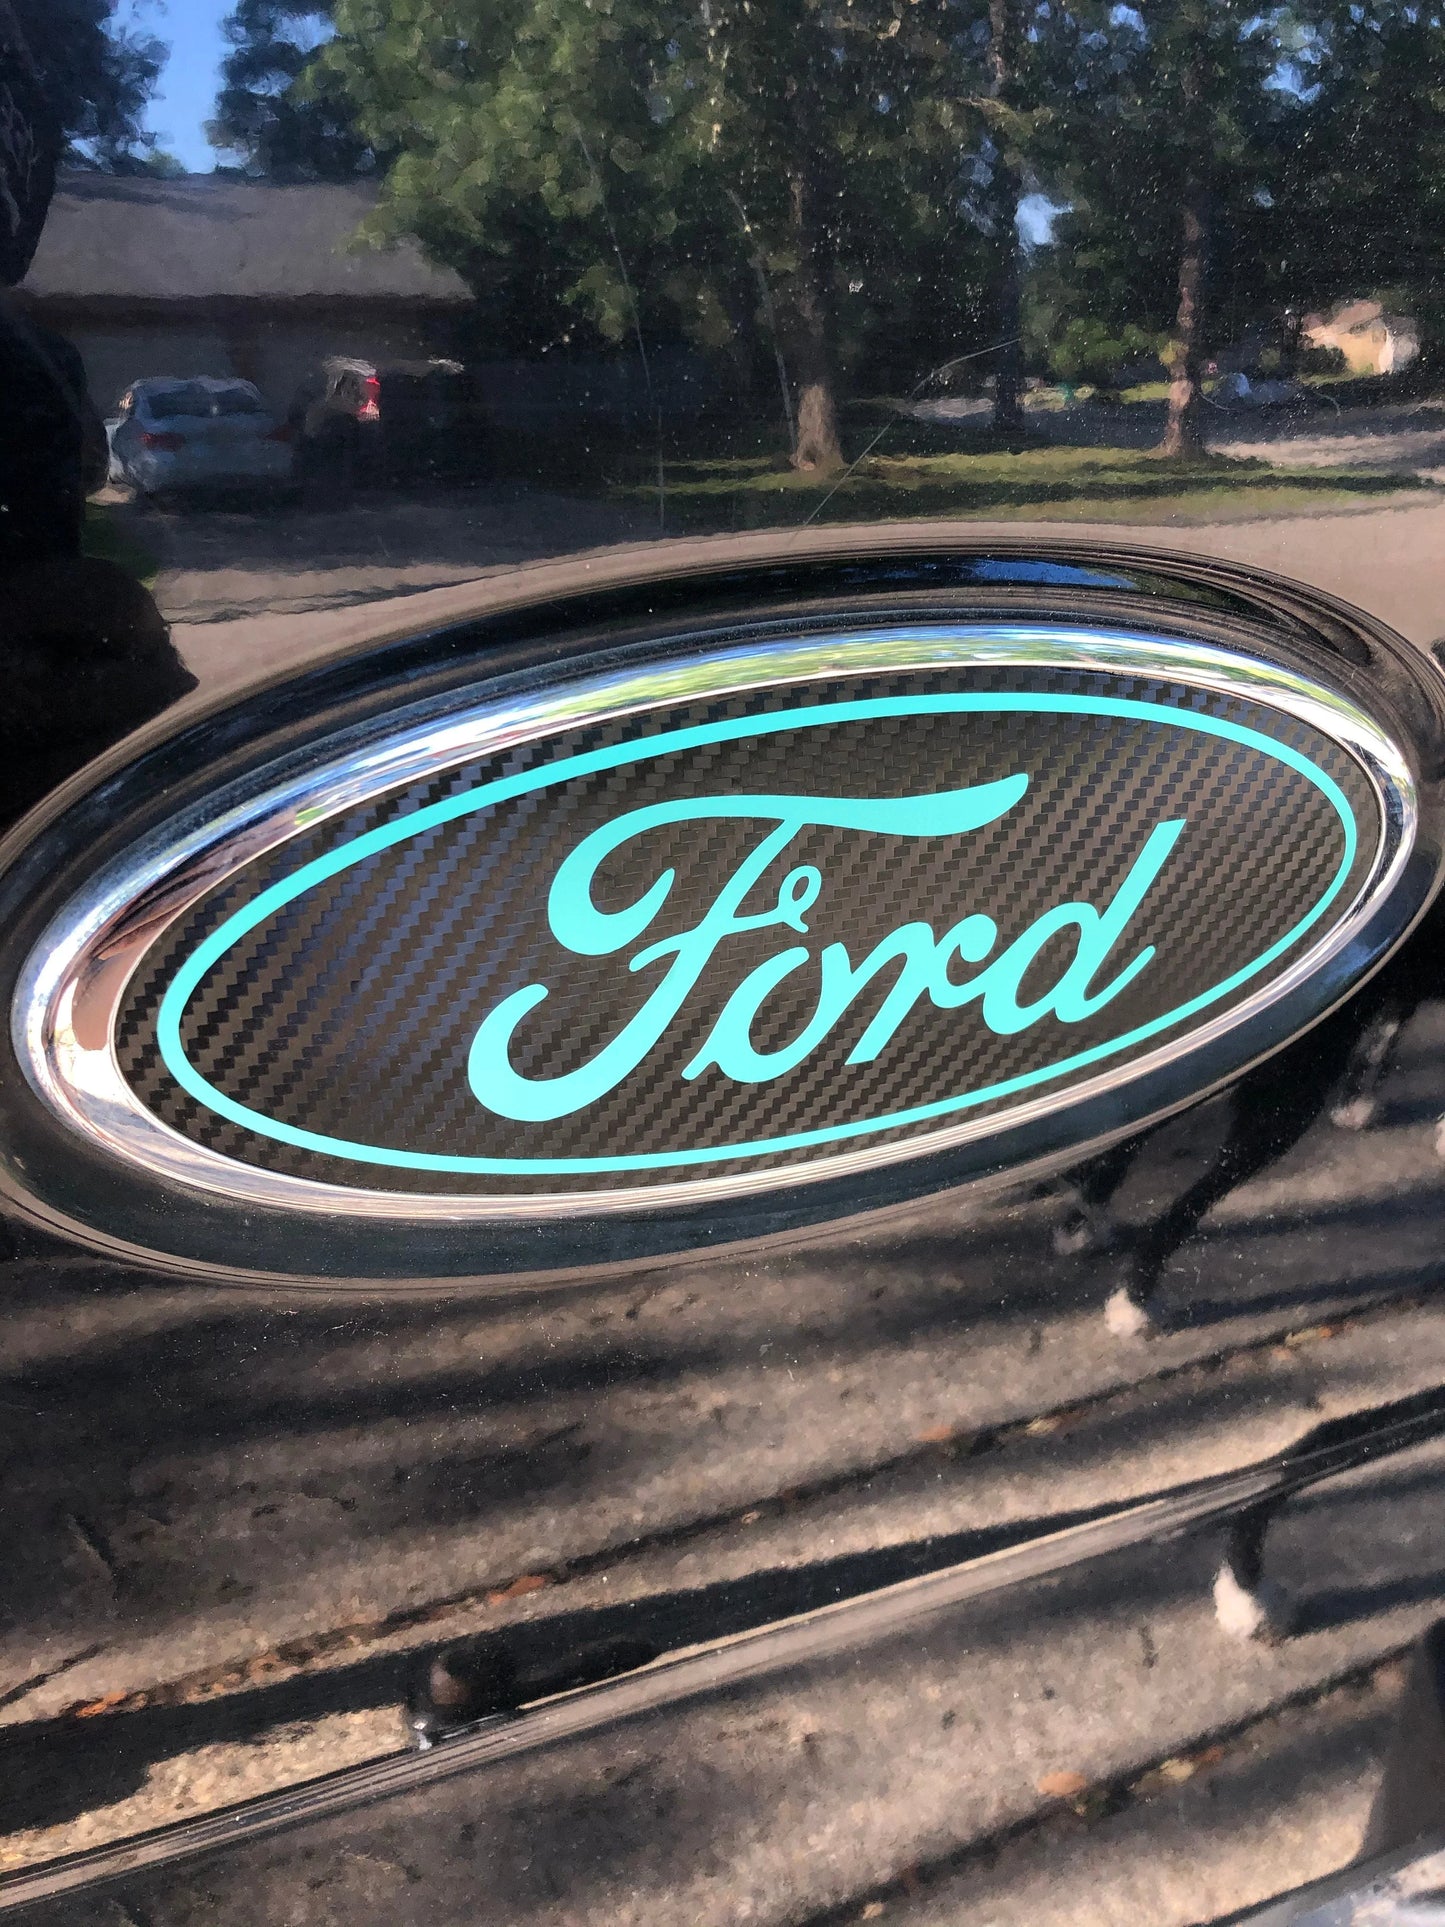 2010-2012 Taurus Emblem Overlay DECALS Compatible with Ford | Front & Rear Set